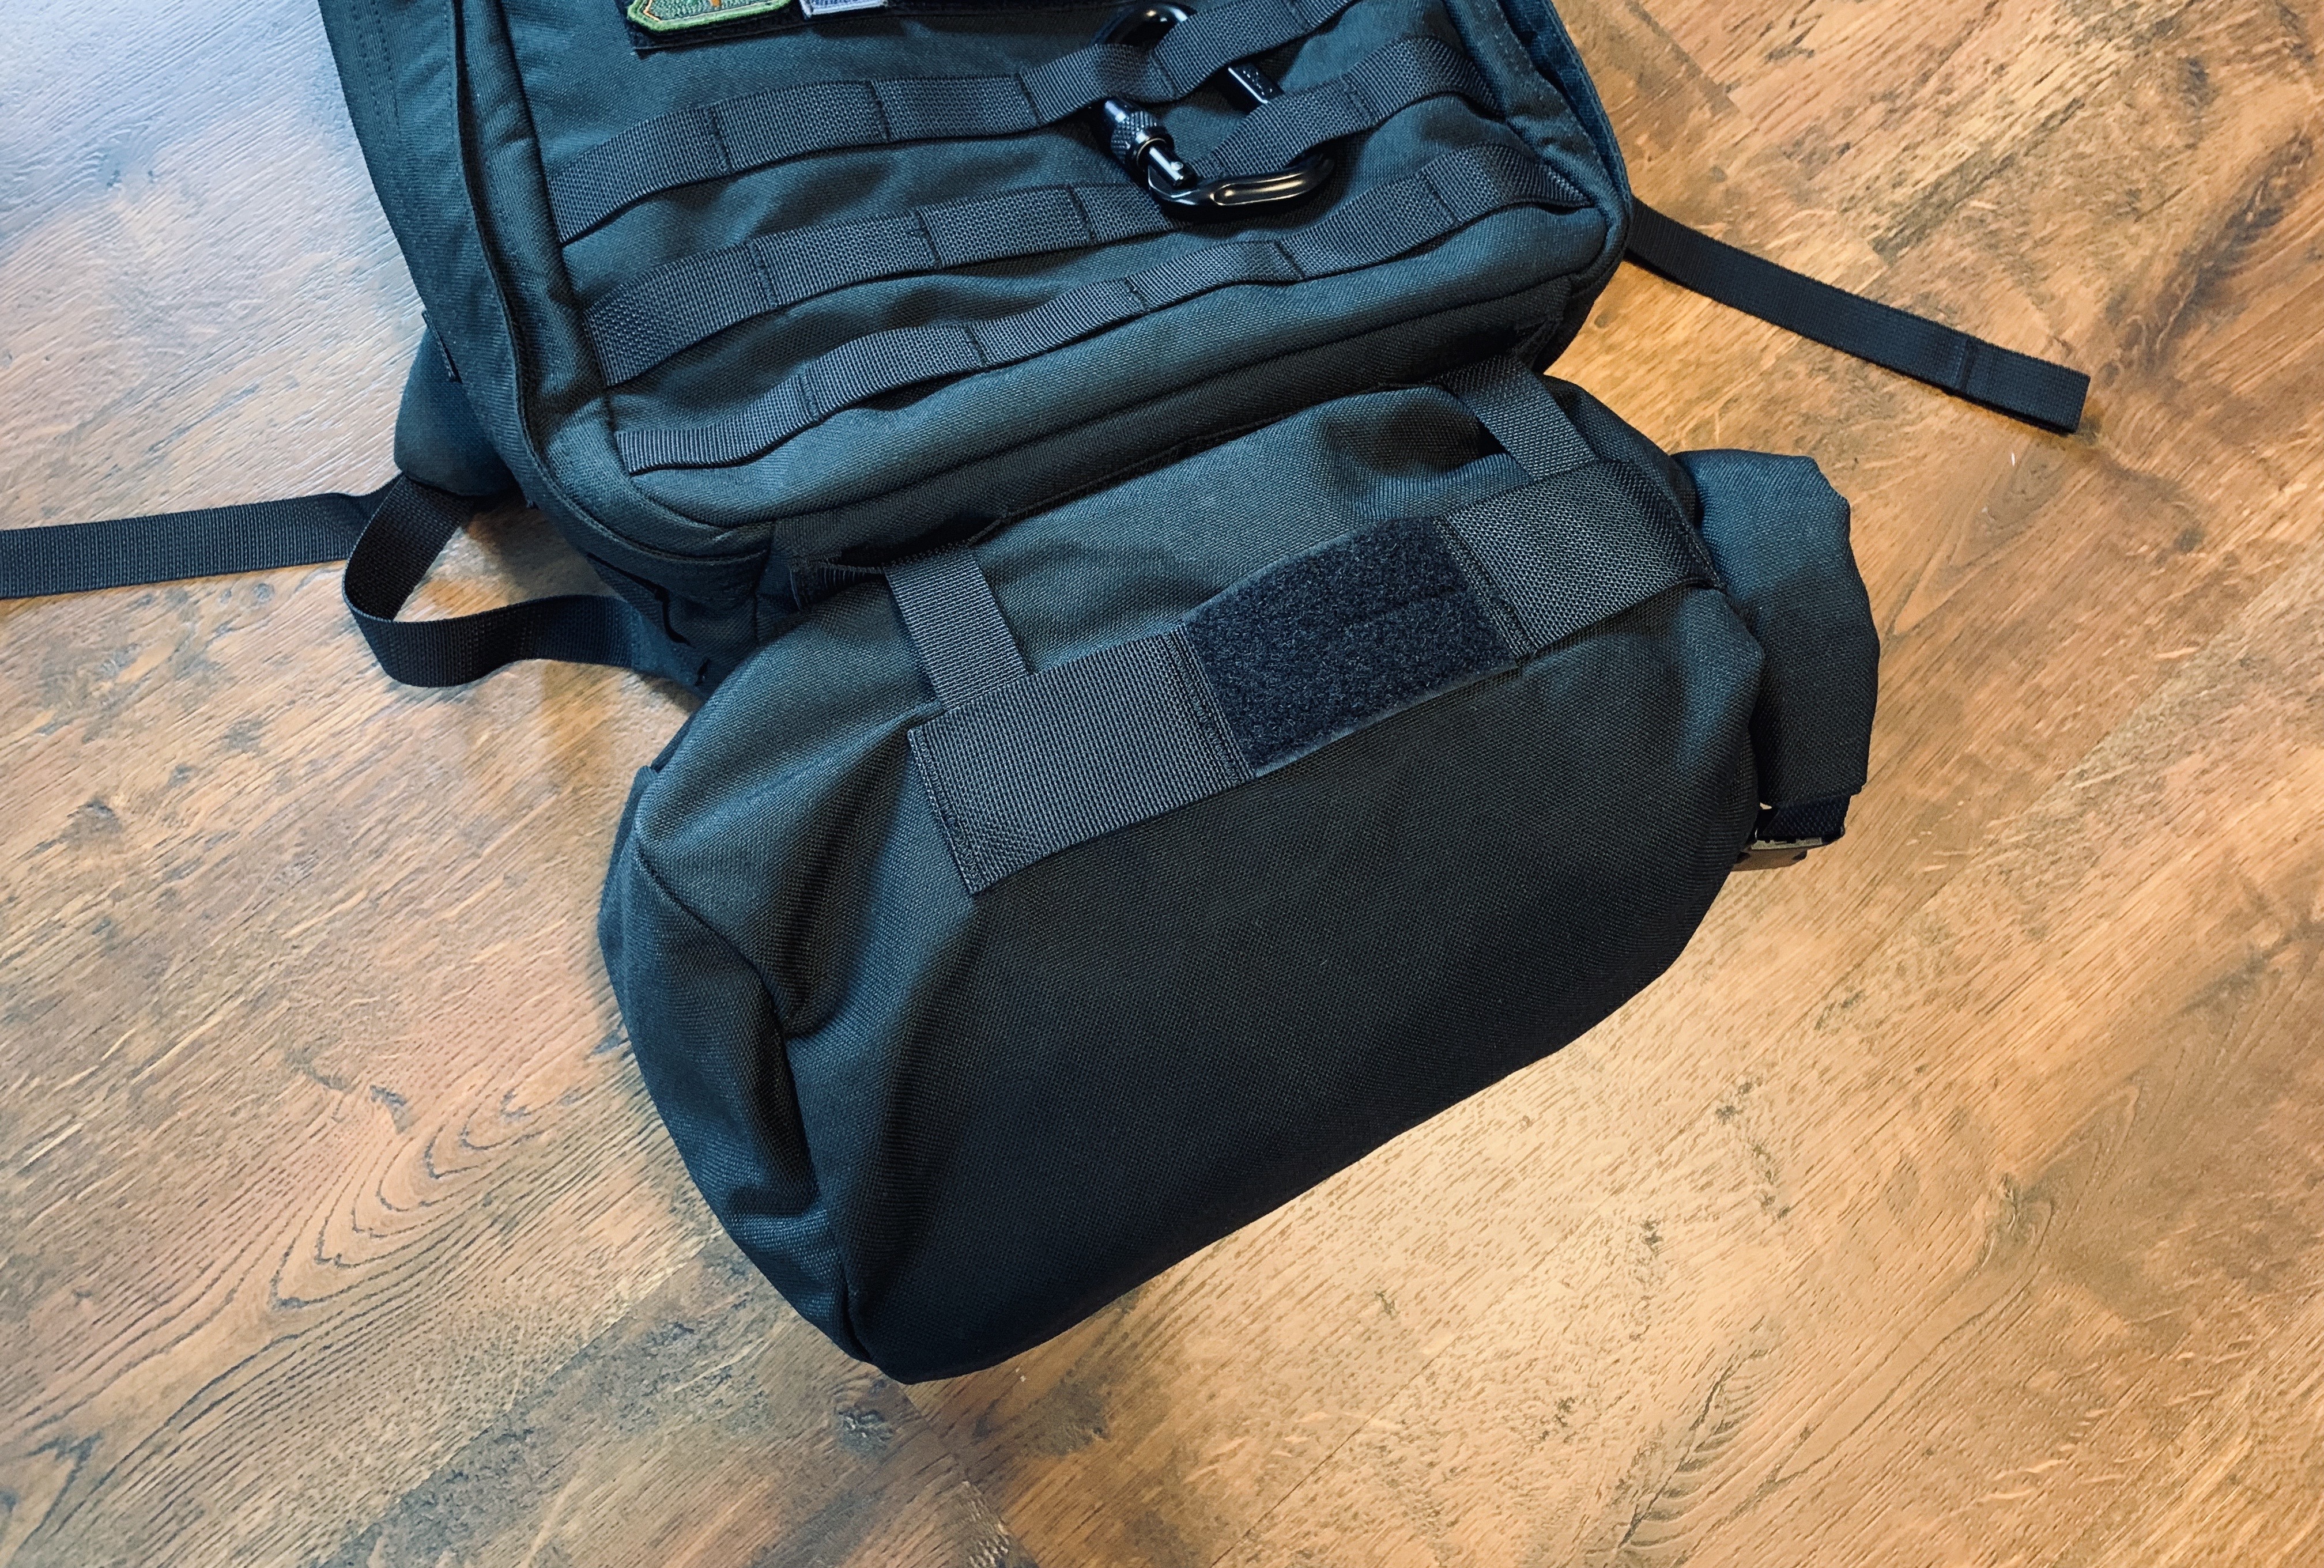 GORUCK GR1 Workshop and Tough Bag – The Brooks Review